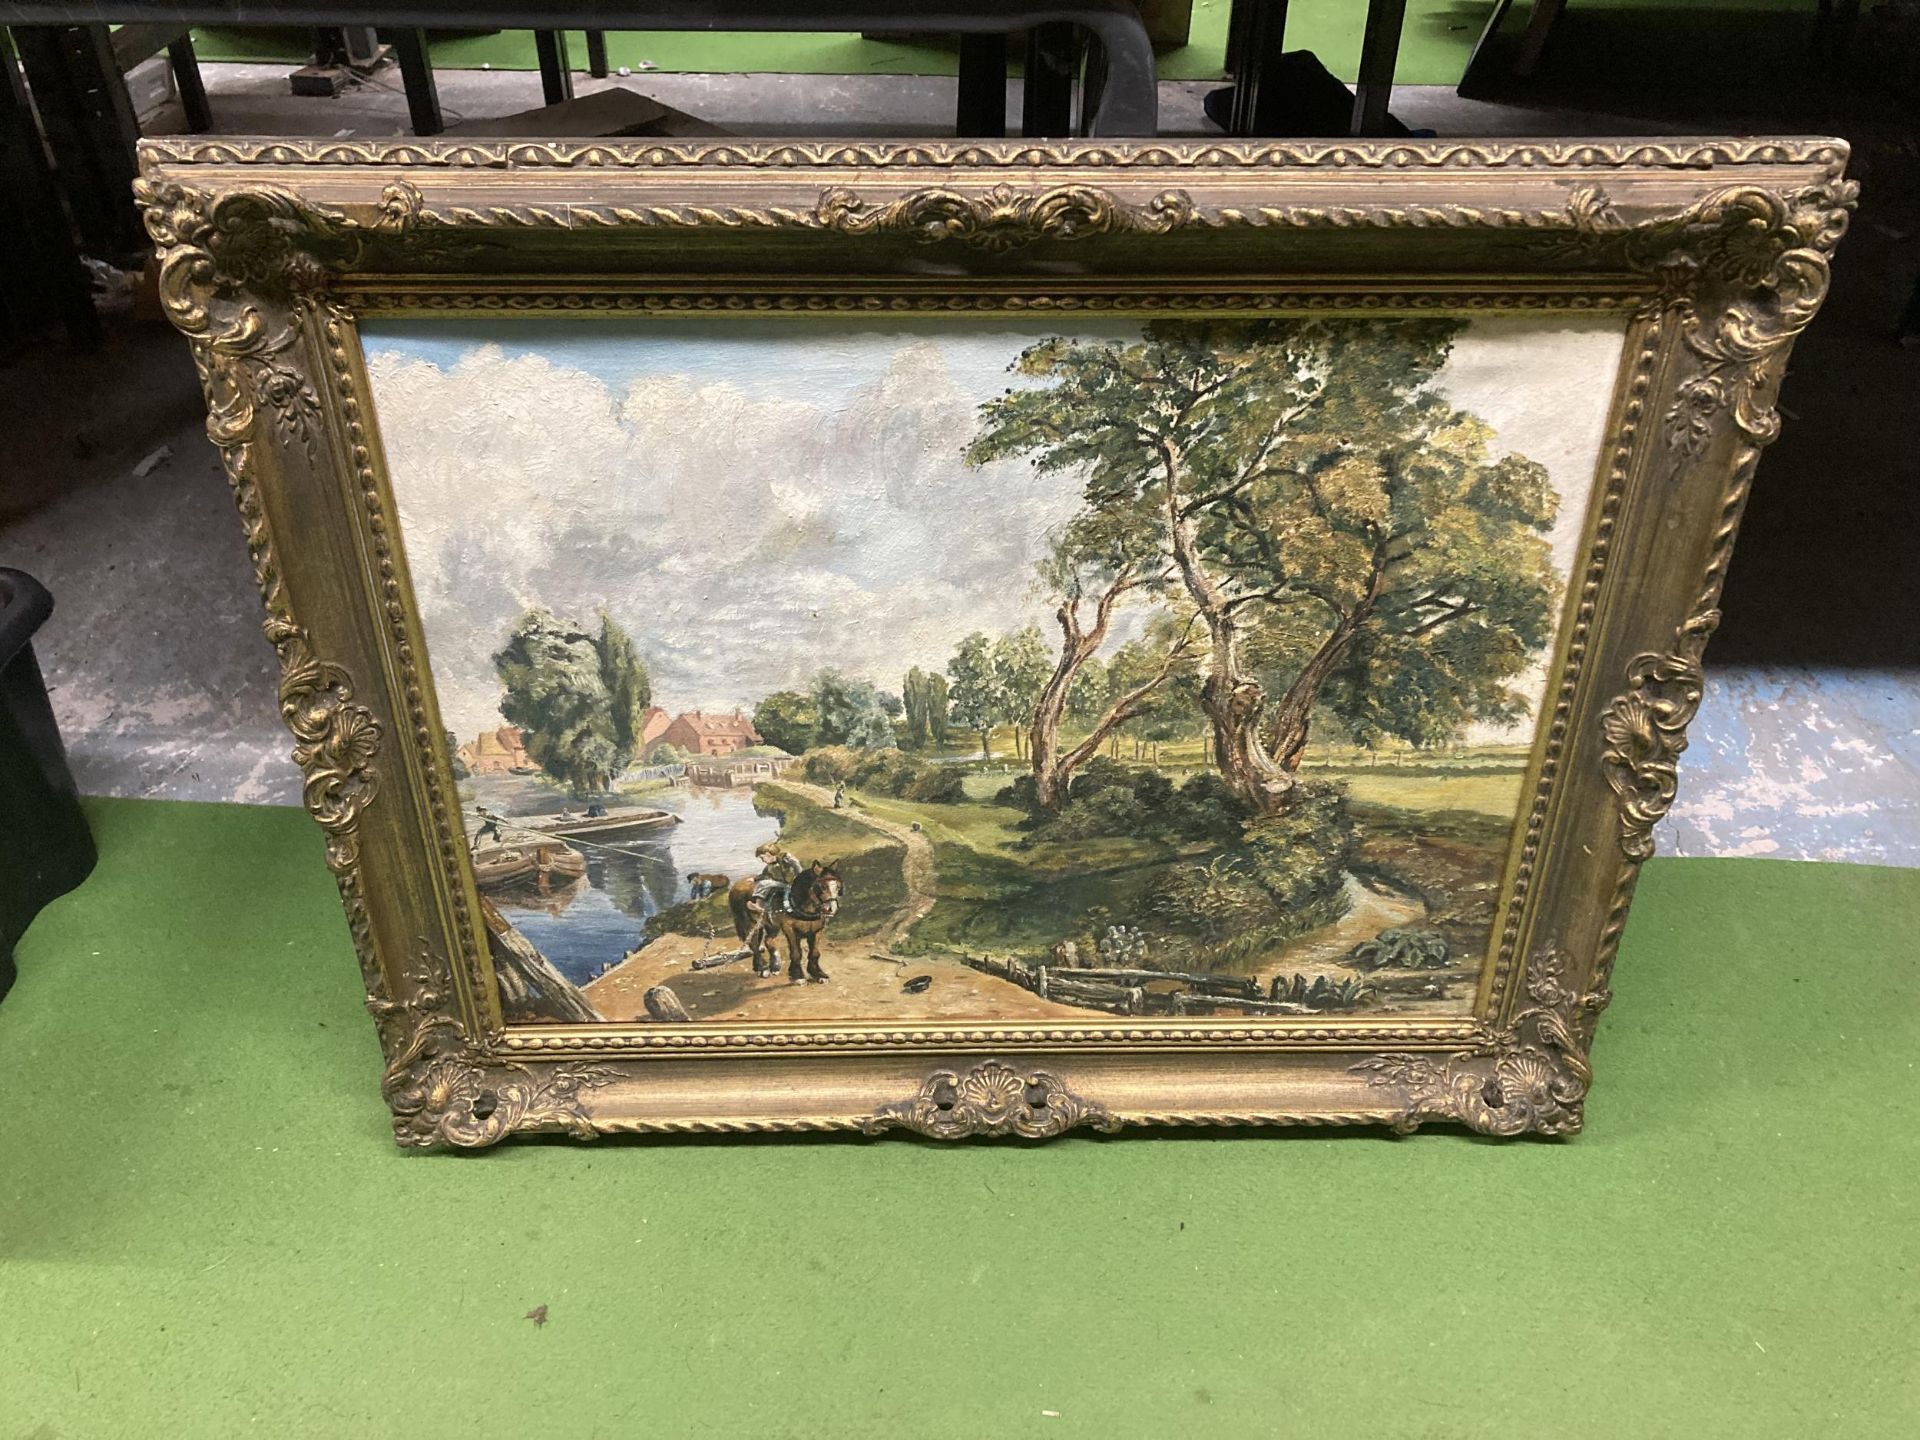 AN ORNATE GILT FRAMED OIL PAINTING OF A RIVERSIDE SCENE WITH SHIRE HORSE